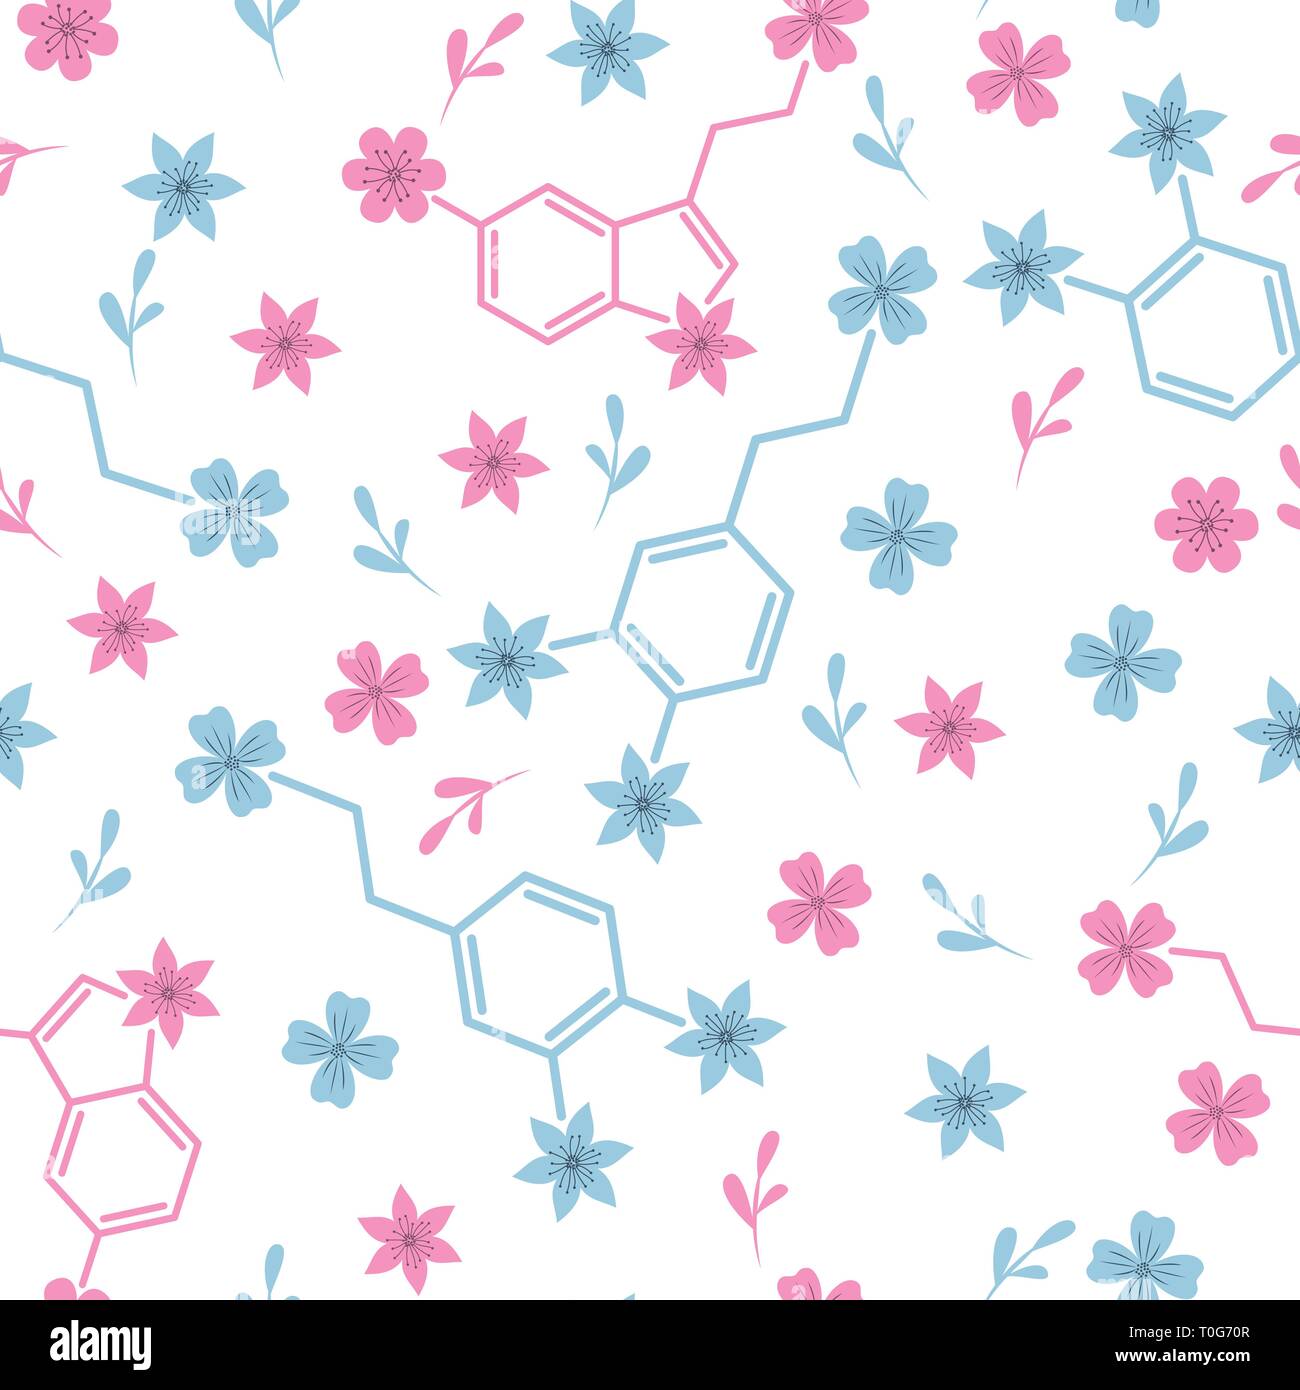 Serotonin and dopamine molecules and flowers seamless pattern Stock Vector